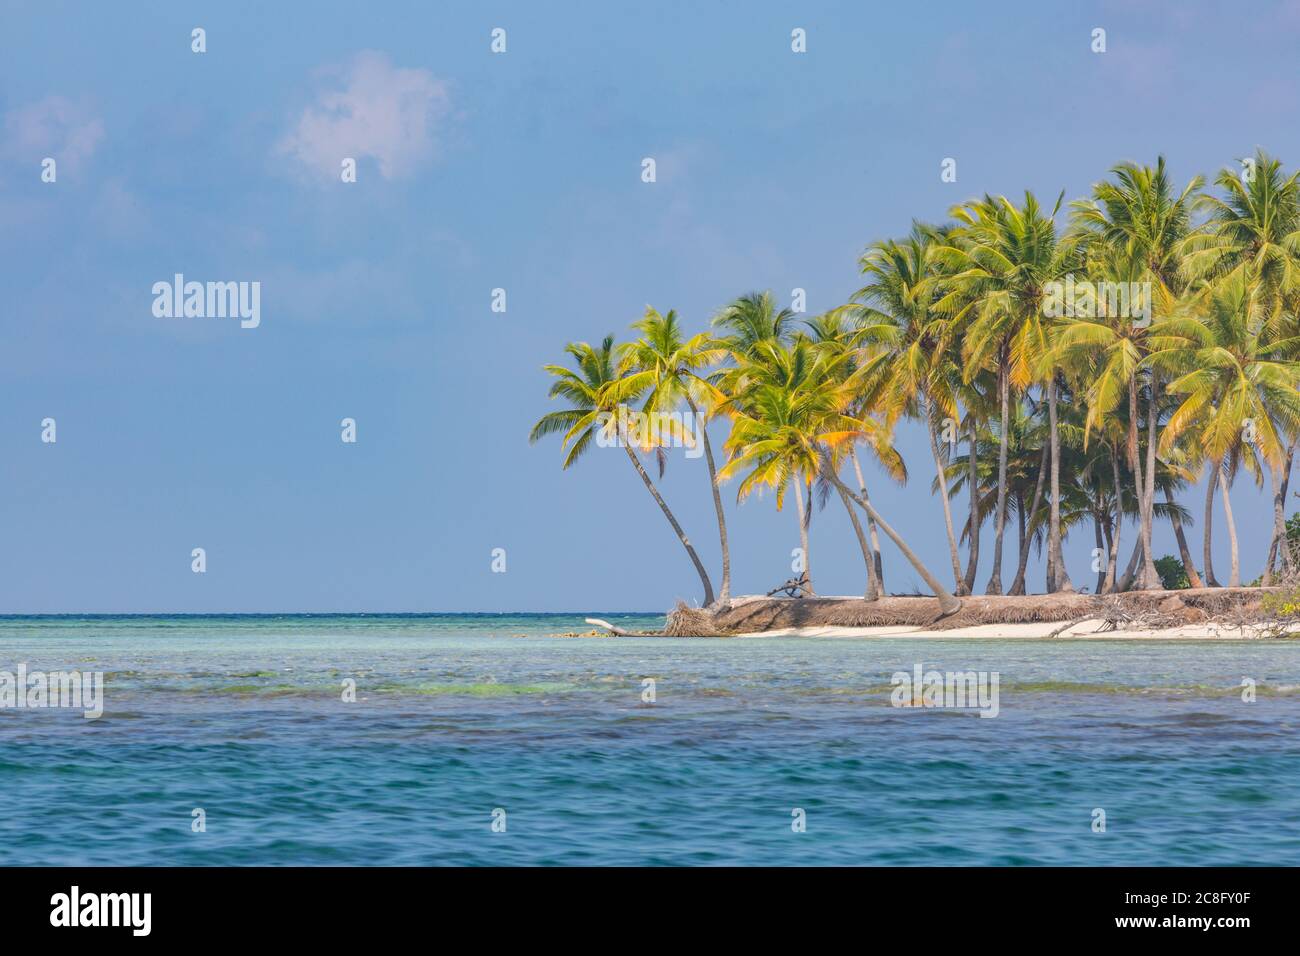 Exotic beach on a tropical island among palm trees, lagoon sea with coral reef. Amazing beach landscape, copy space, paradise destination Stock Photo